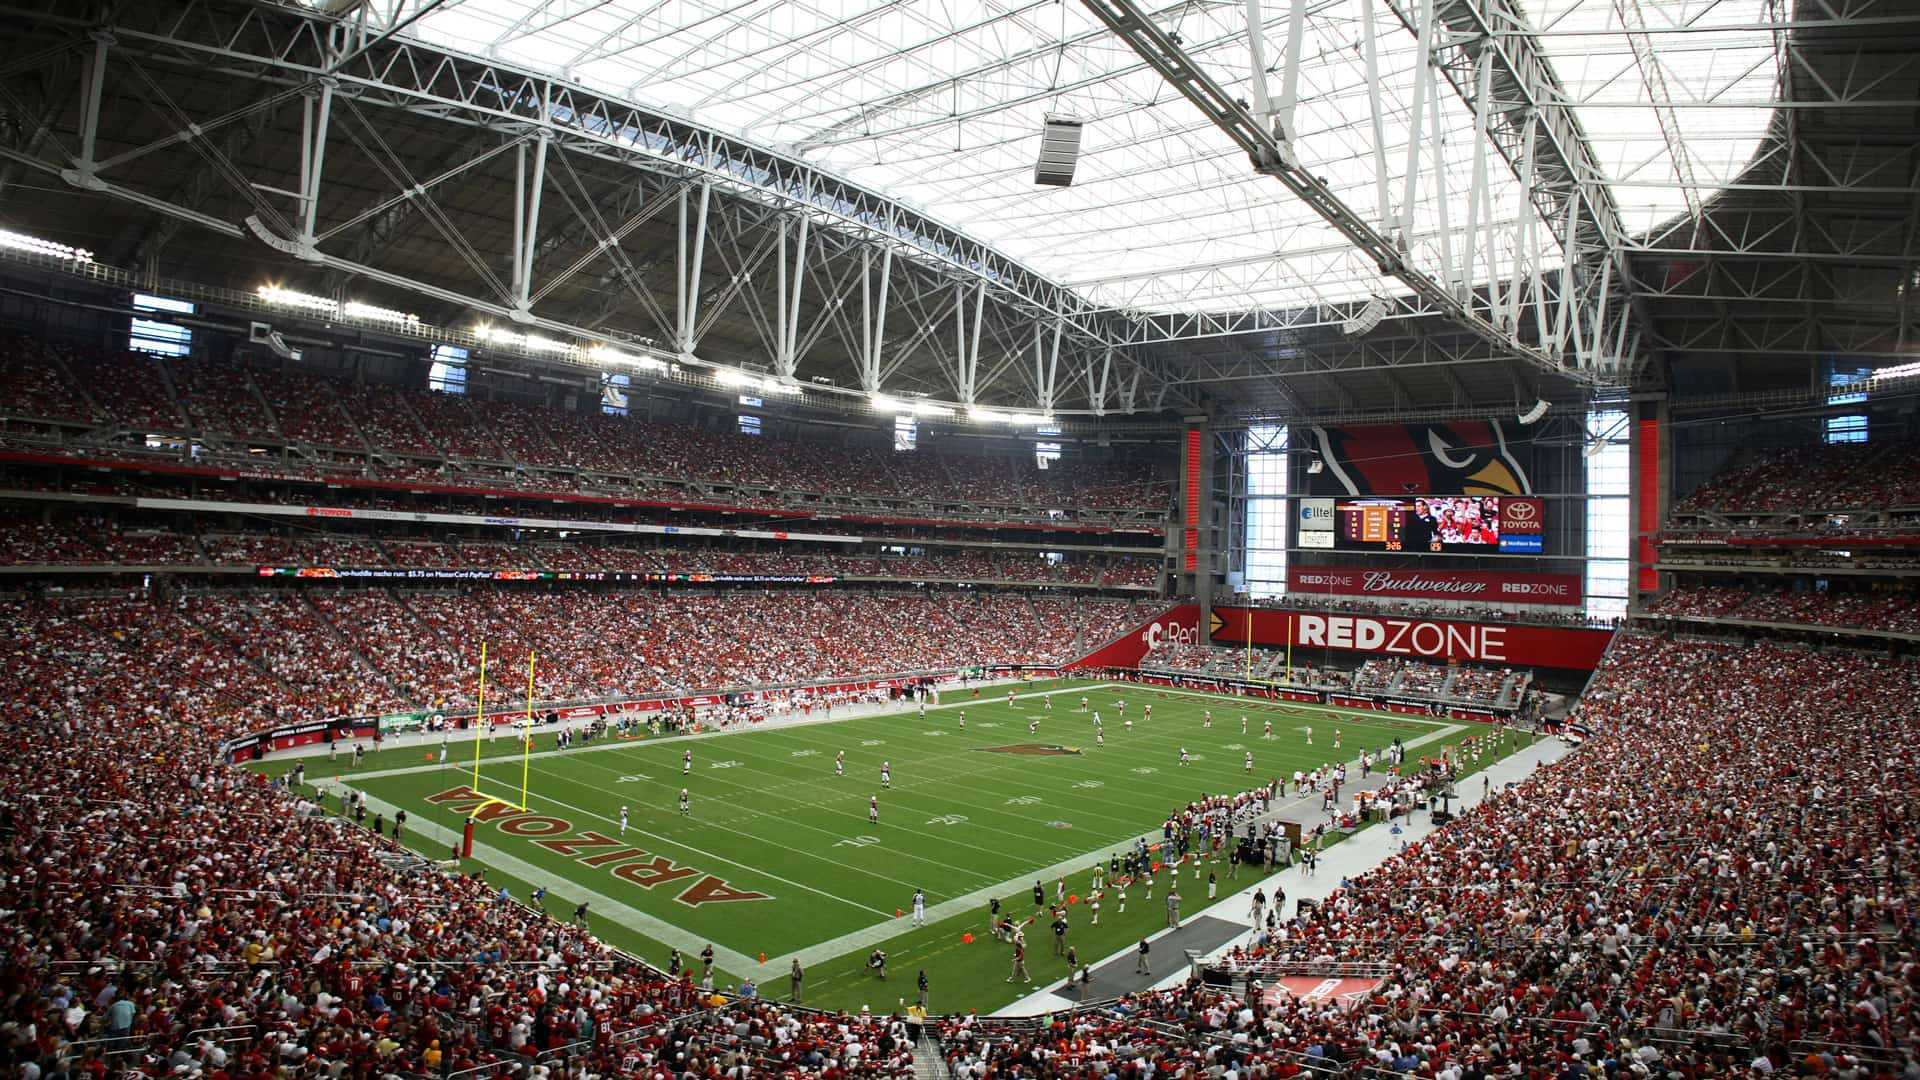 MyVenue provides NCR Quest POS support to State Farm Stadium in Glendale, Arizona.